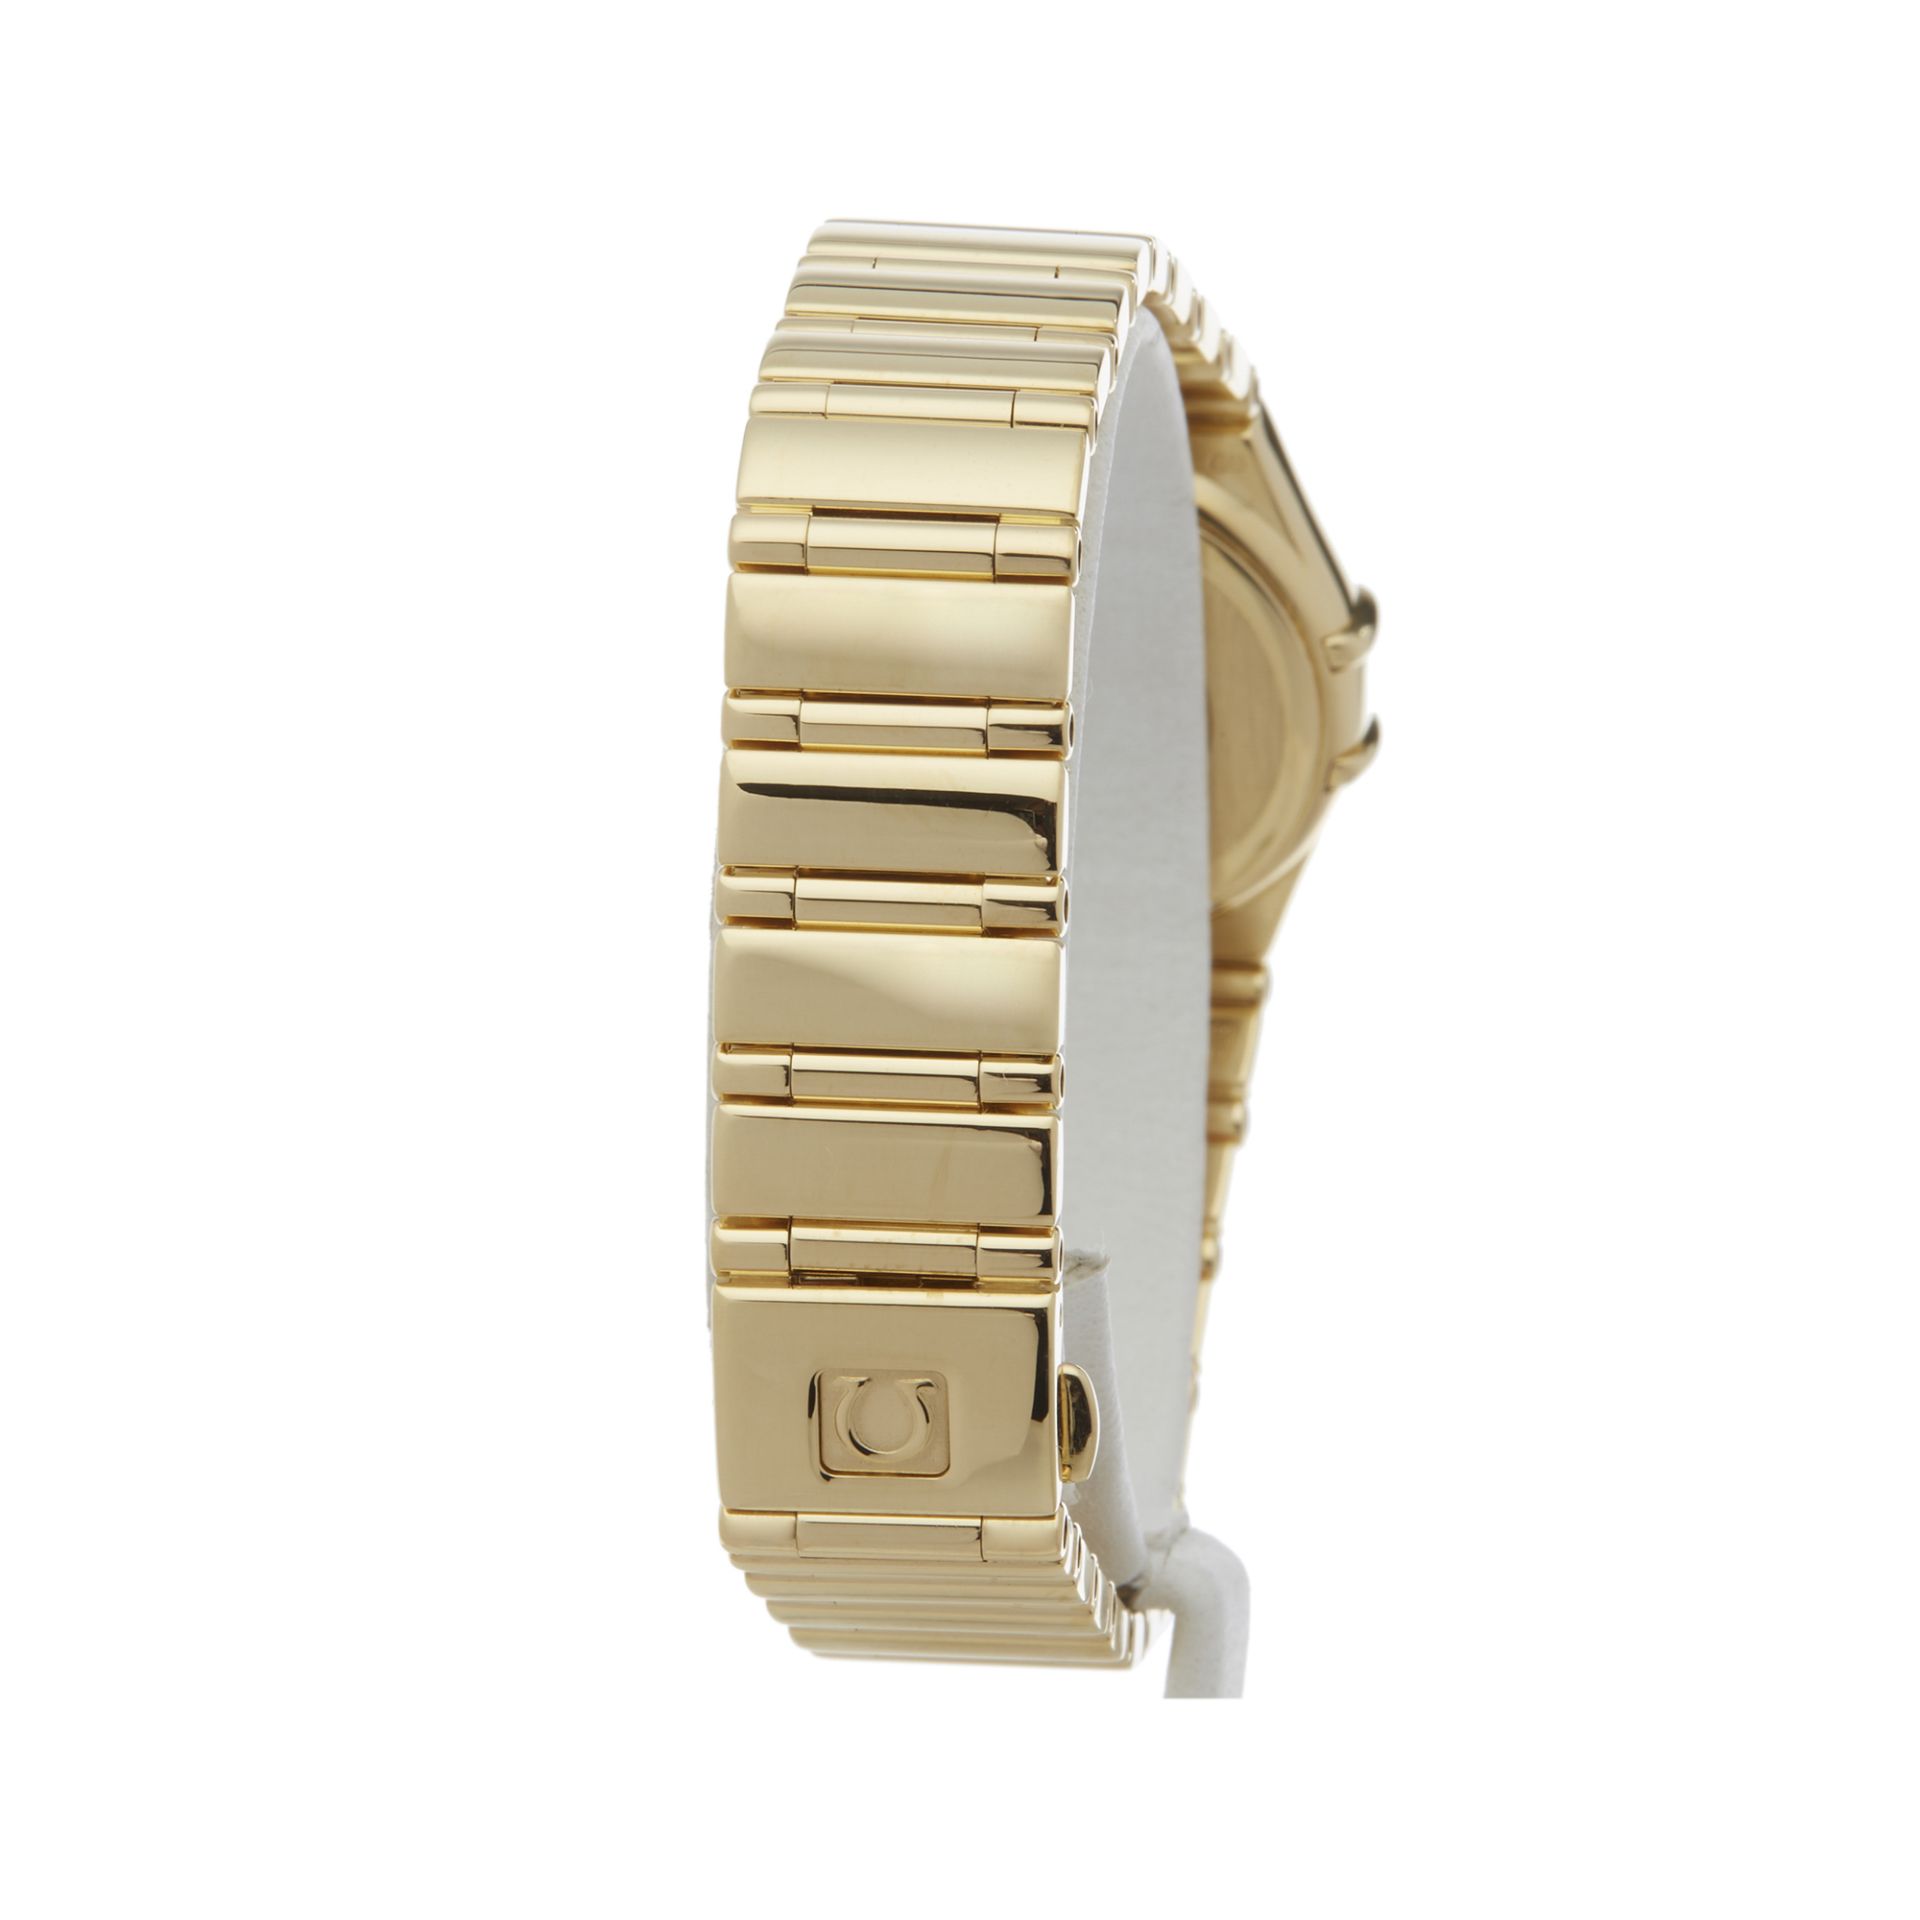 Omega Constellation Diamond Mother of Pearl 18k Yellow Gold - 11647500 - Image 4 of 7